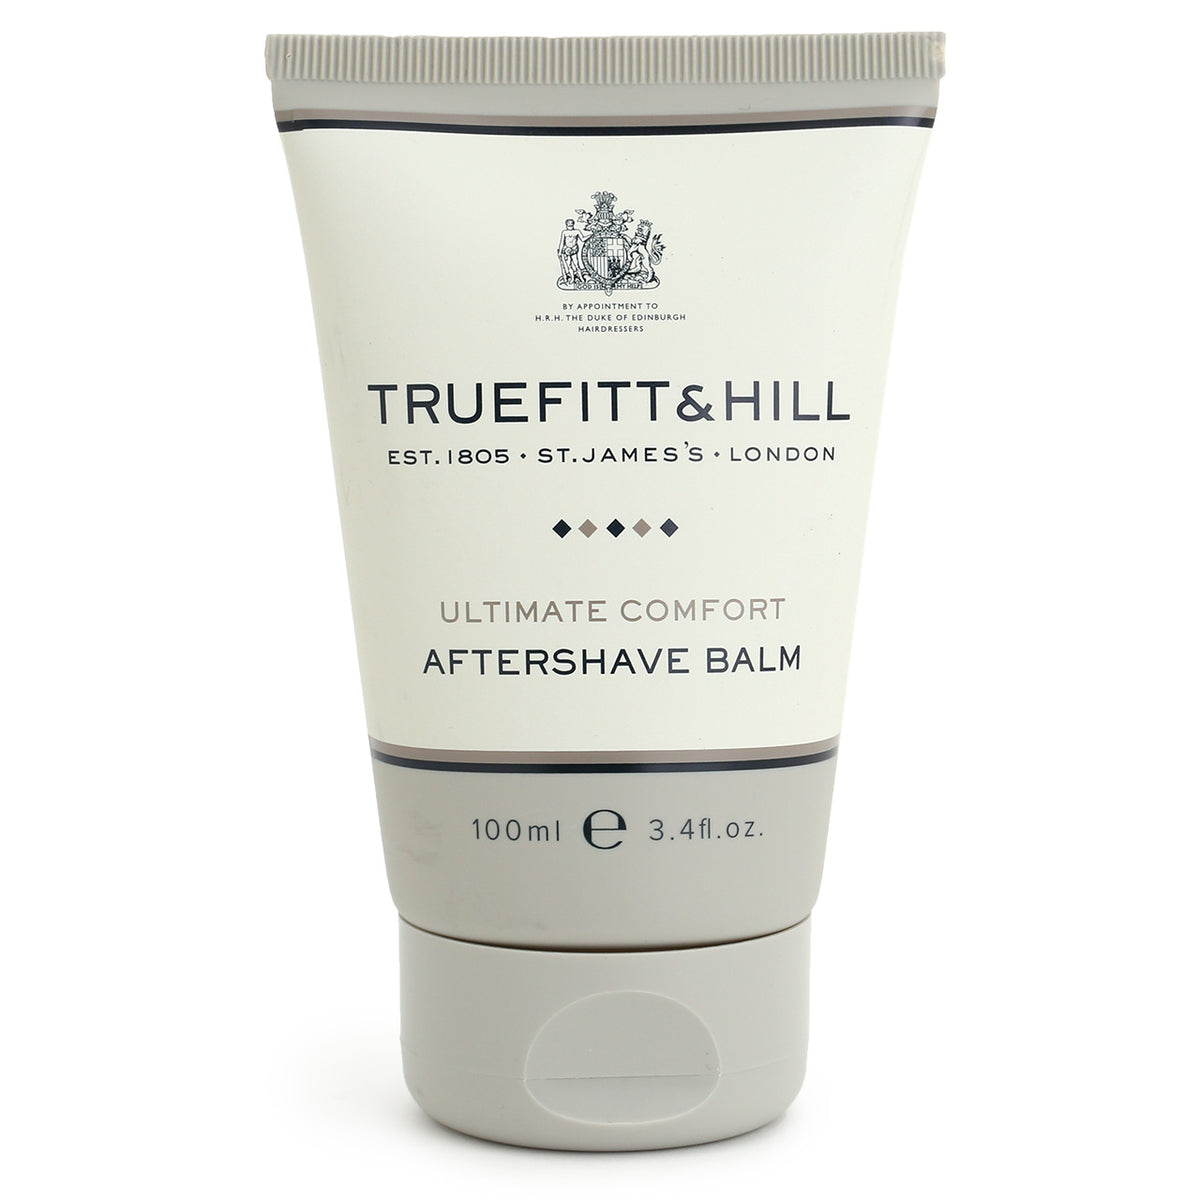 Truefitt &amp; Hill Aftershave Balm in a 100ml tube